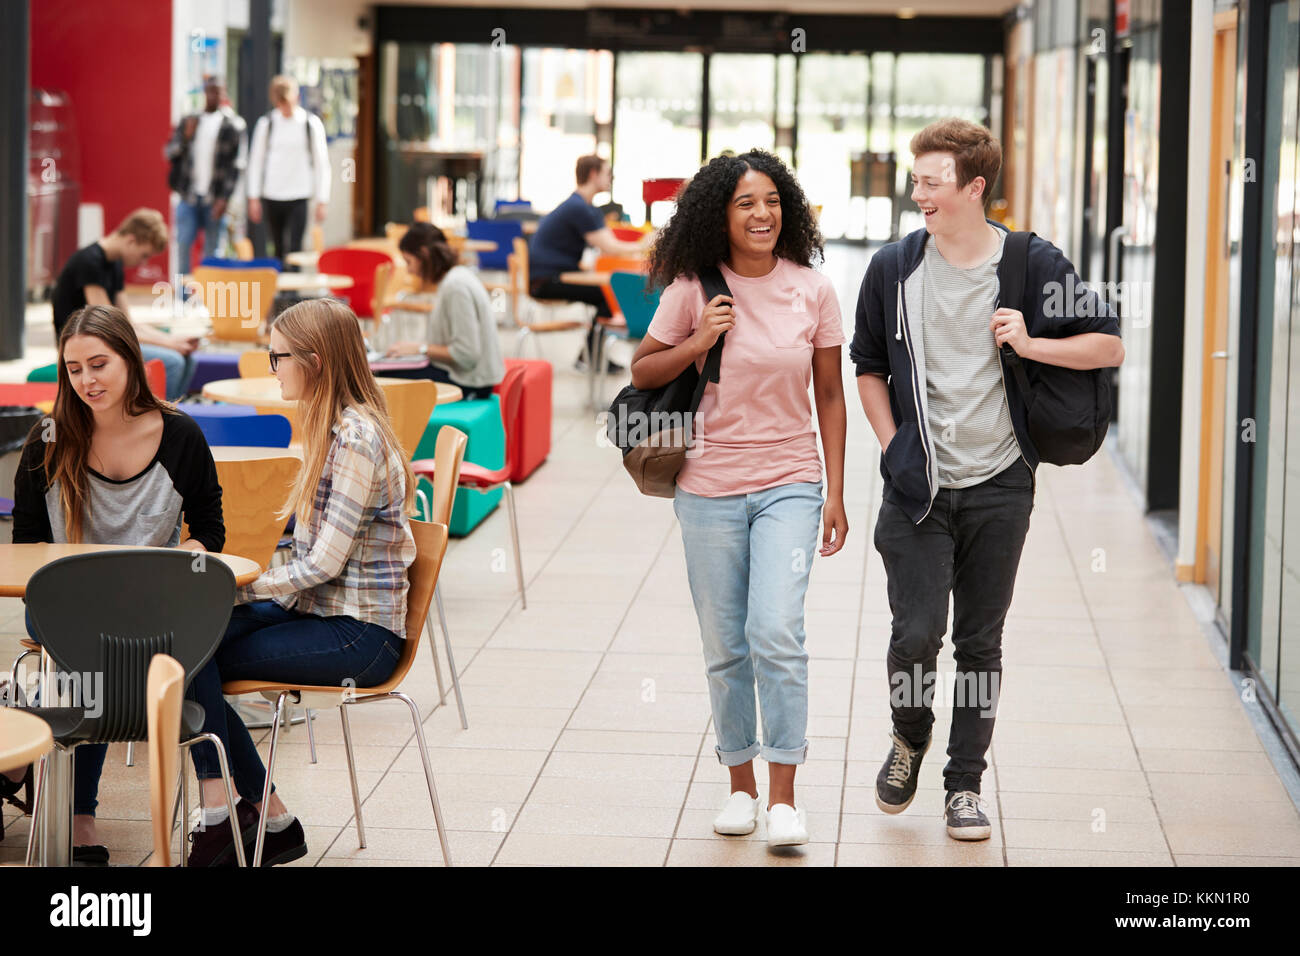 Communal Area Of Busy College Campus With Students Stock Photo